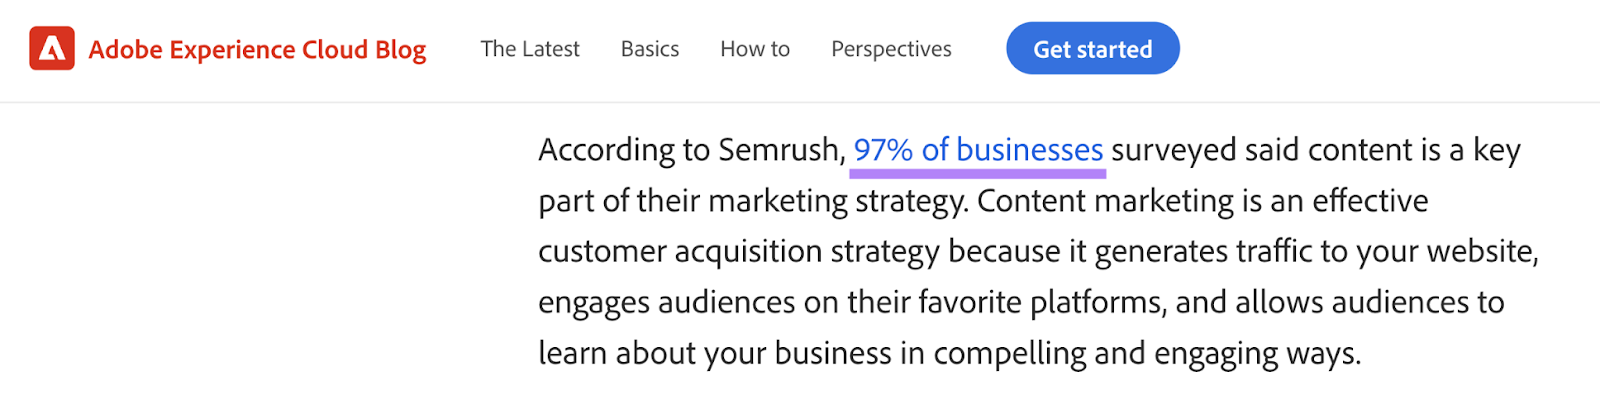 Adobe cites Semrush blog and includes link to study